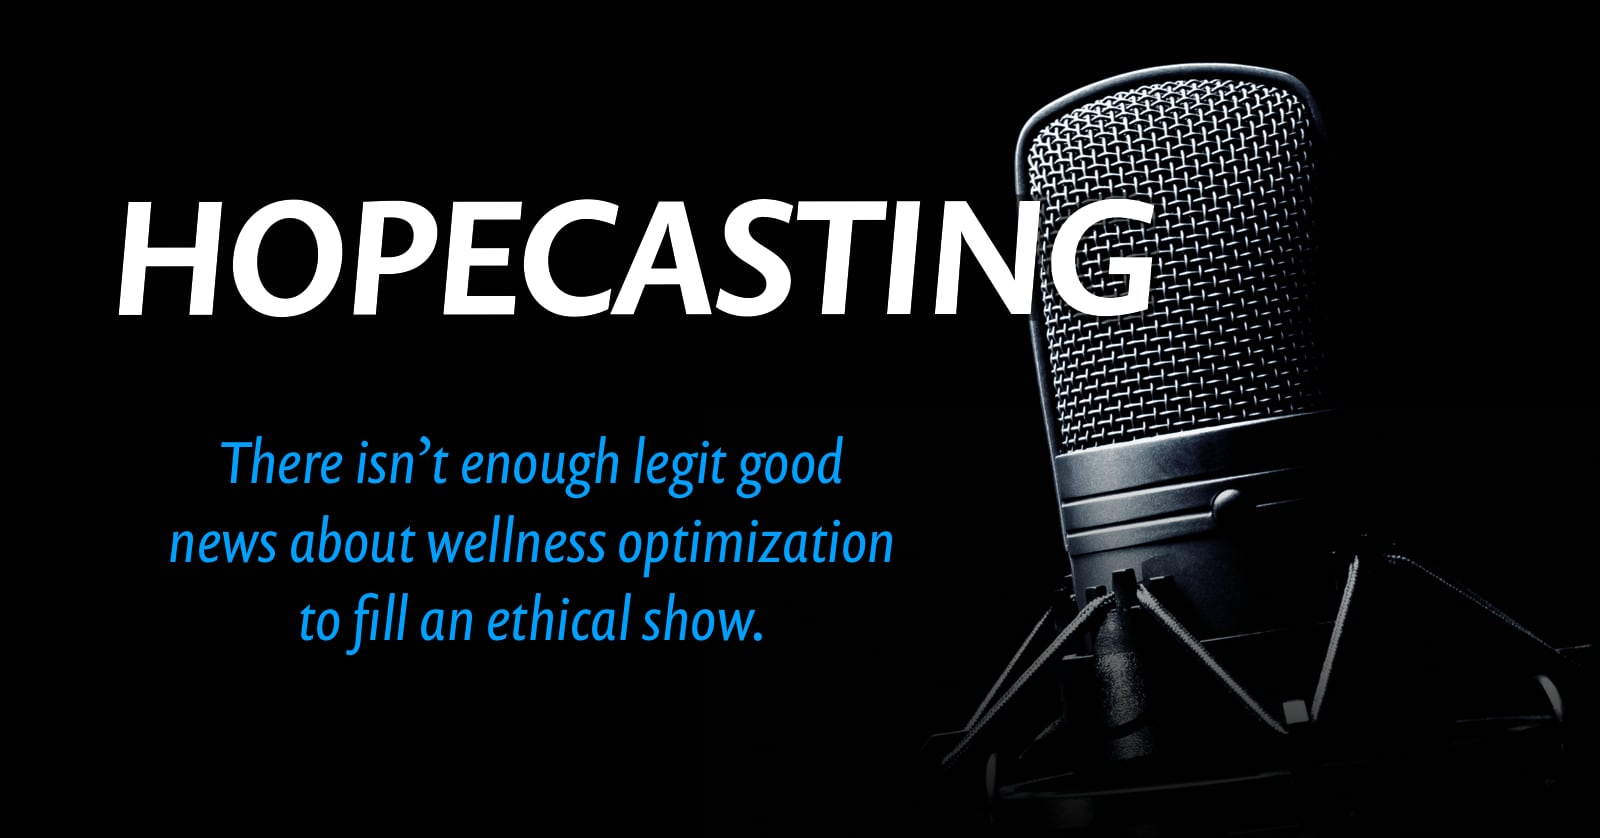 Dark phot of a professional studio mic half in shadow, with the word “hopecasting” superimposed on it, and the caption, “There isn’t enough legit good news about wellness optimization to fill an ethical show.”